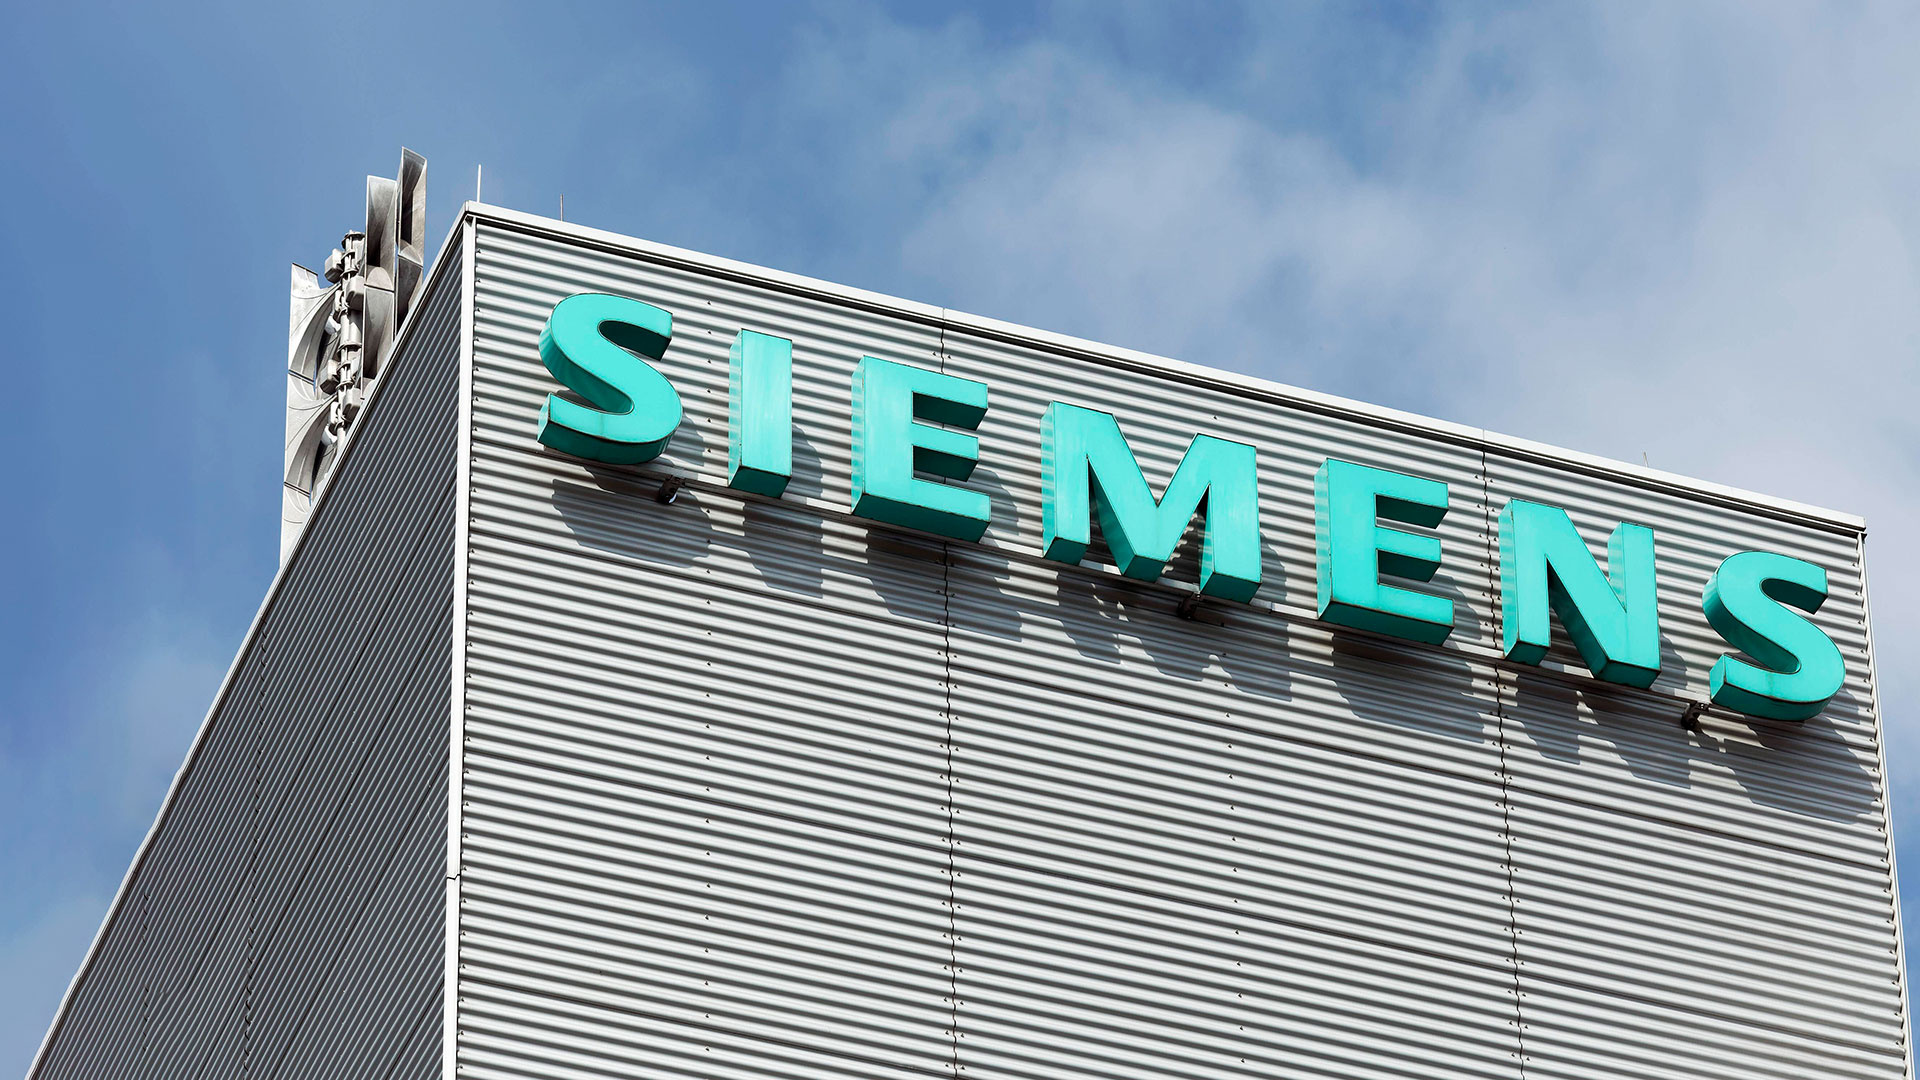 Siemens: A multinational conglomerate corporation, Headquartered in Munich with branch offices abroad. 1920x1080 Full HD Wallpaper.